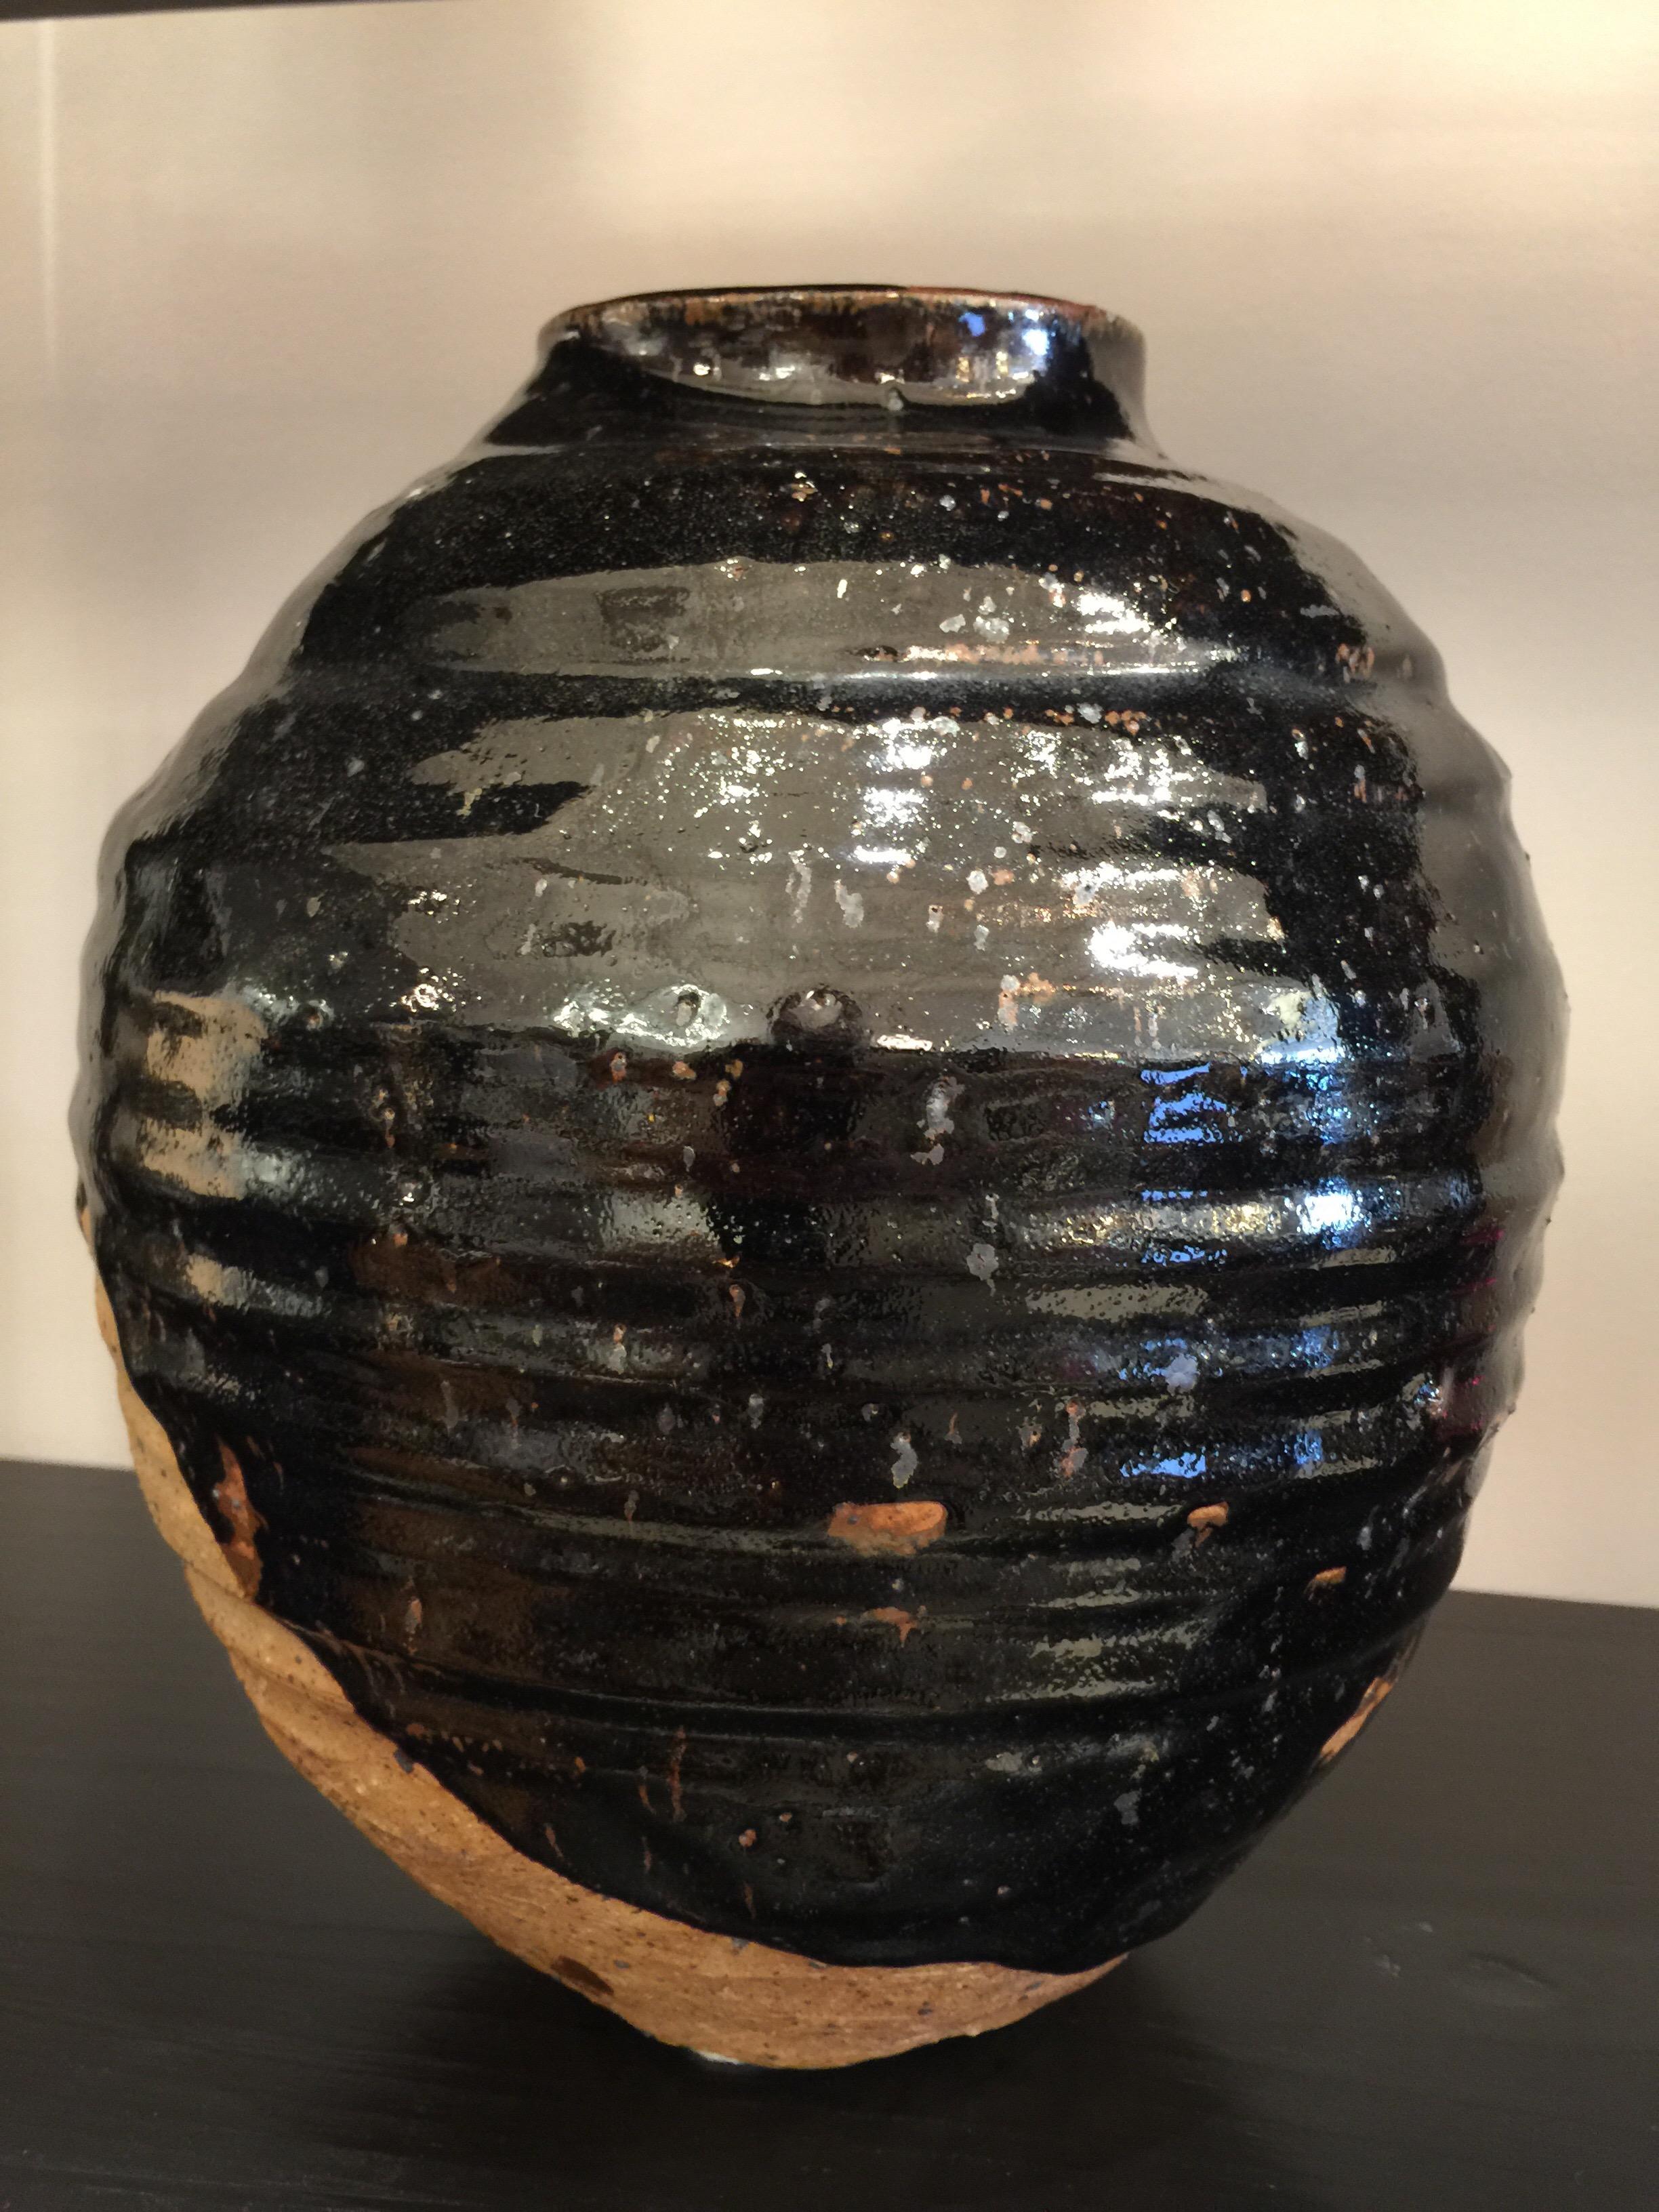 This is an extremely well made and stylish black glazed over natural earthenware vase.